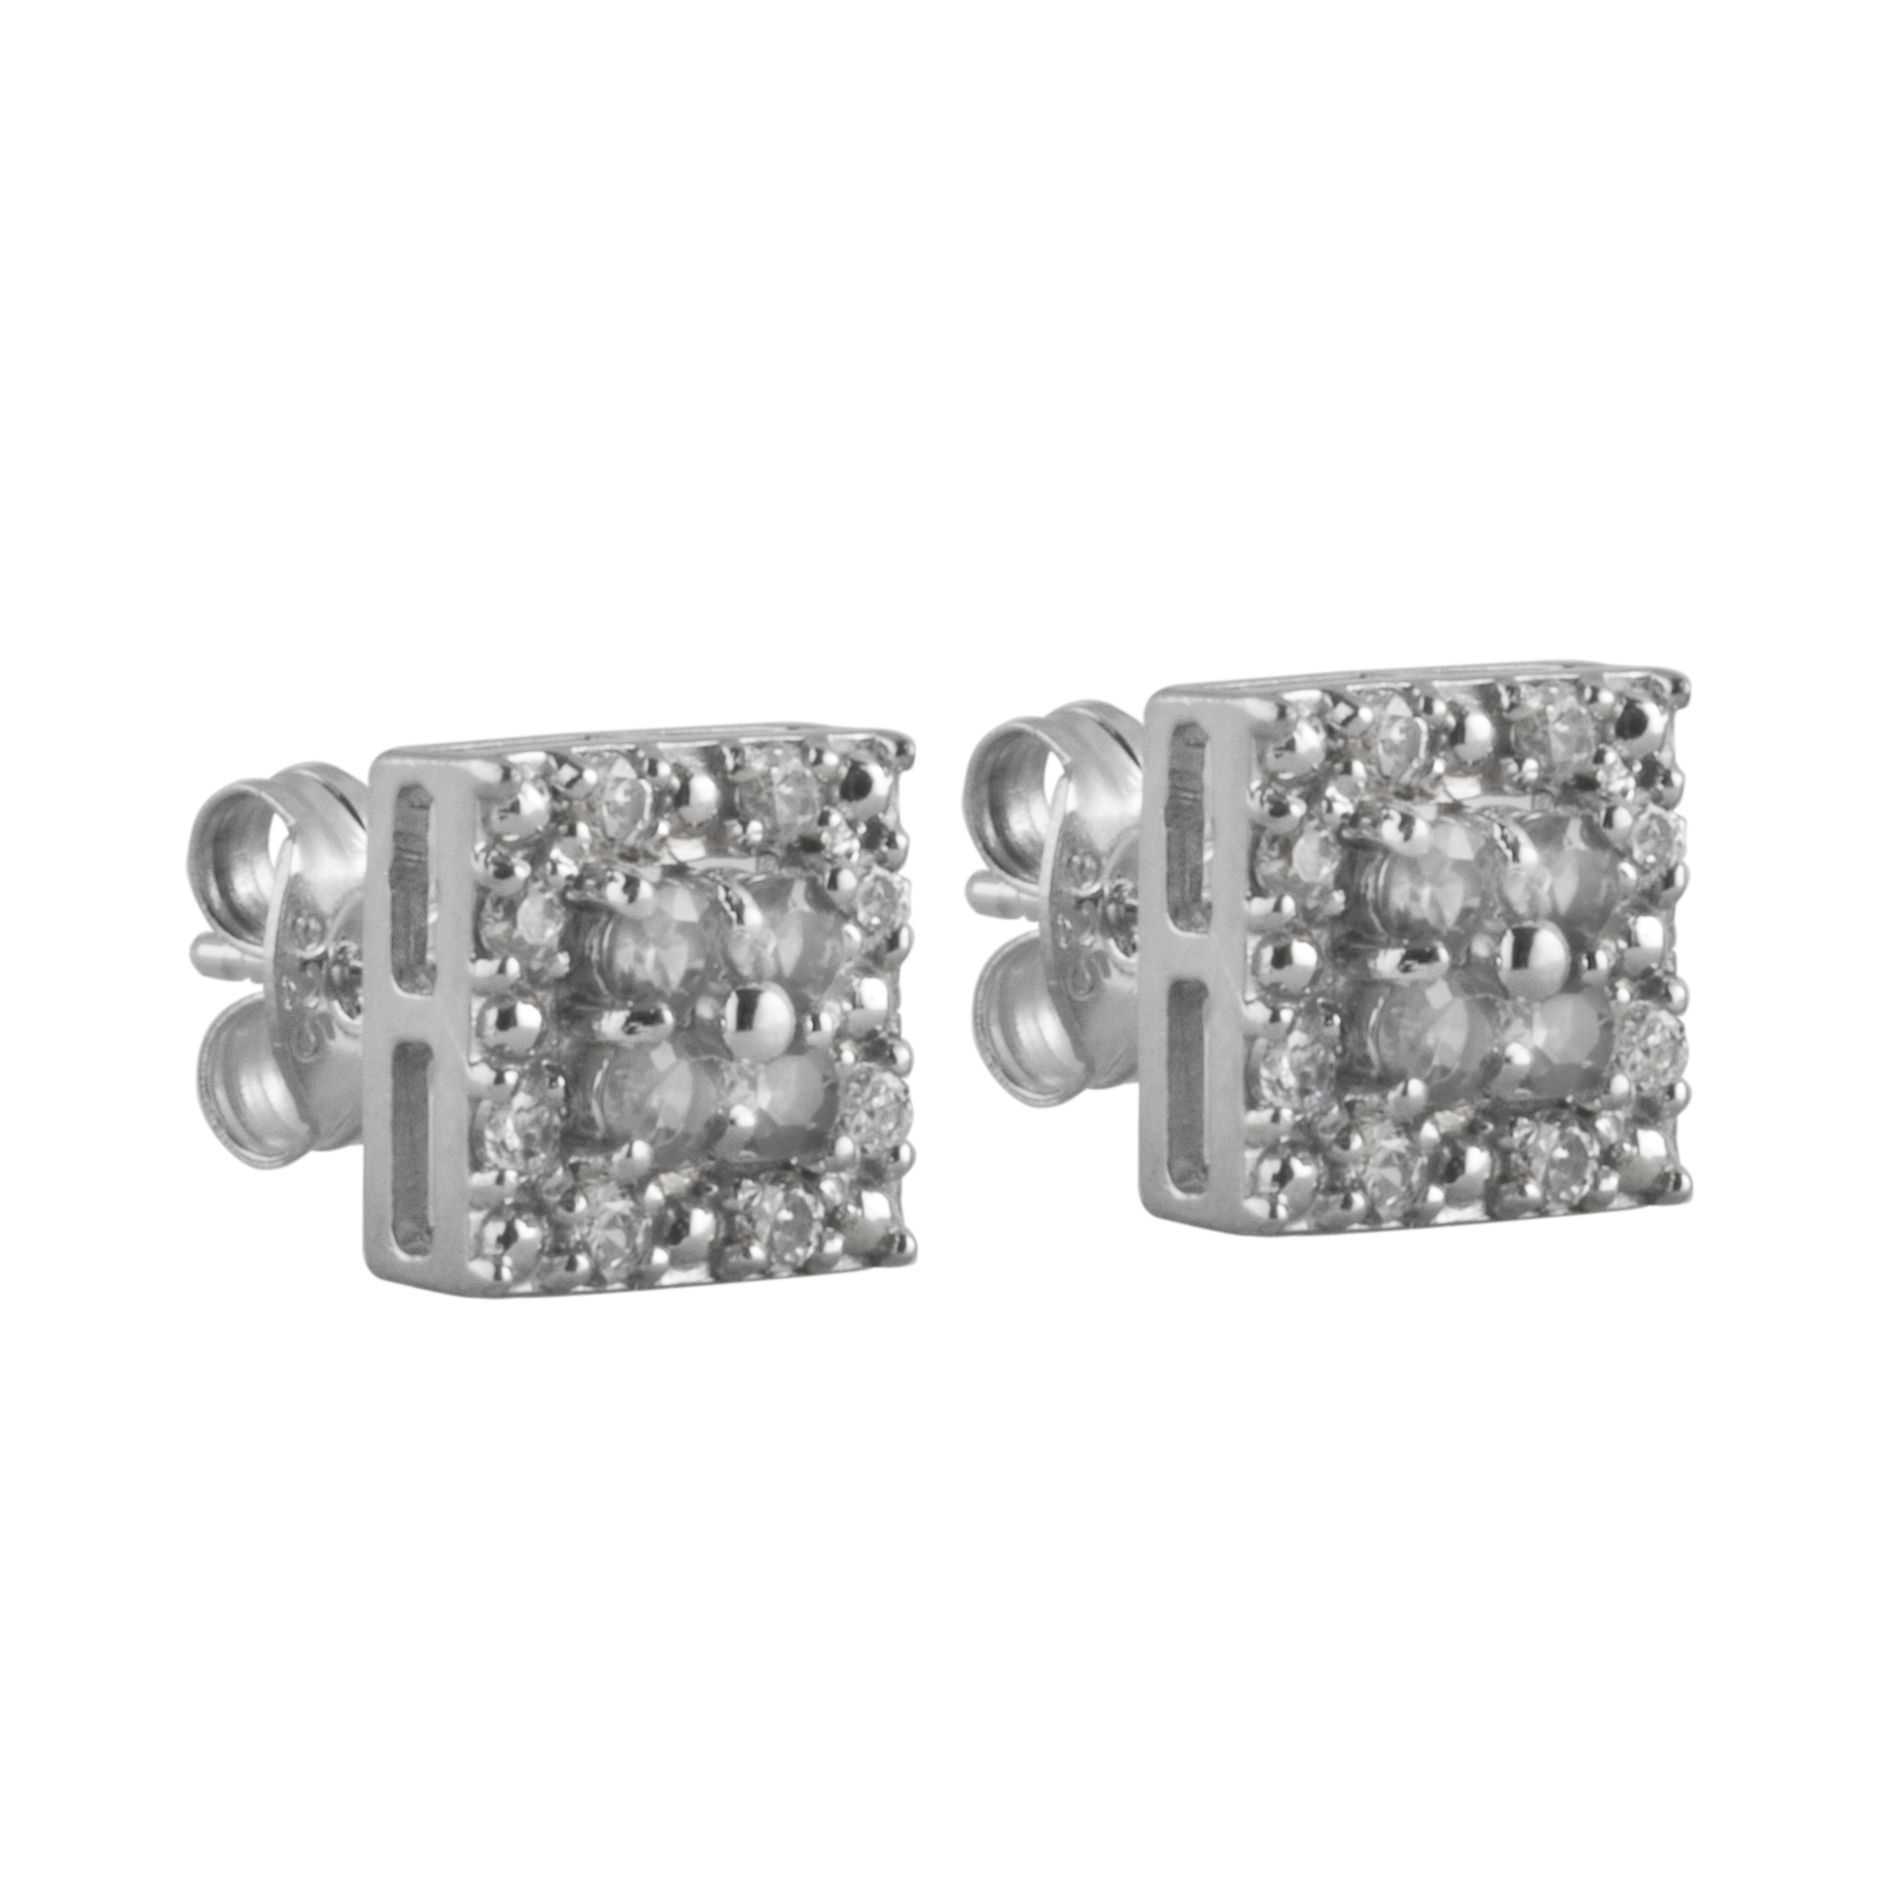 White Topaz and White Sapphire Earrings Sterling Silver